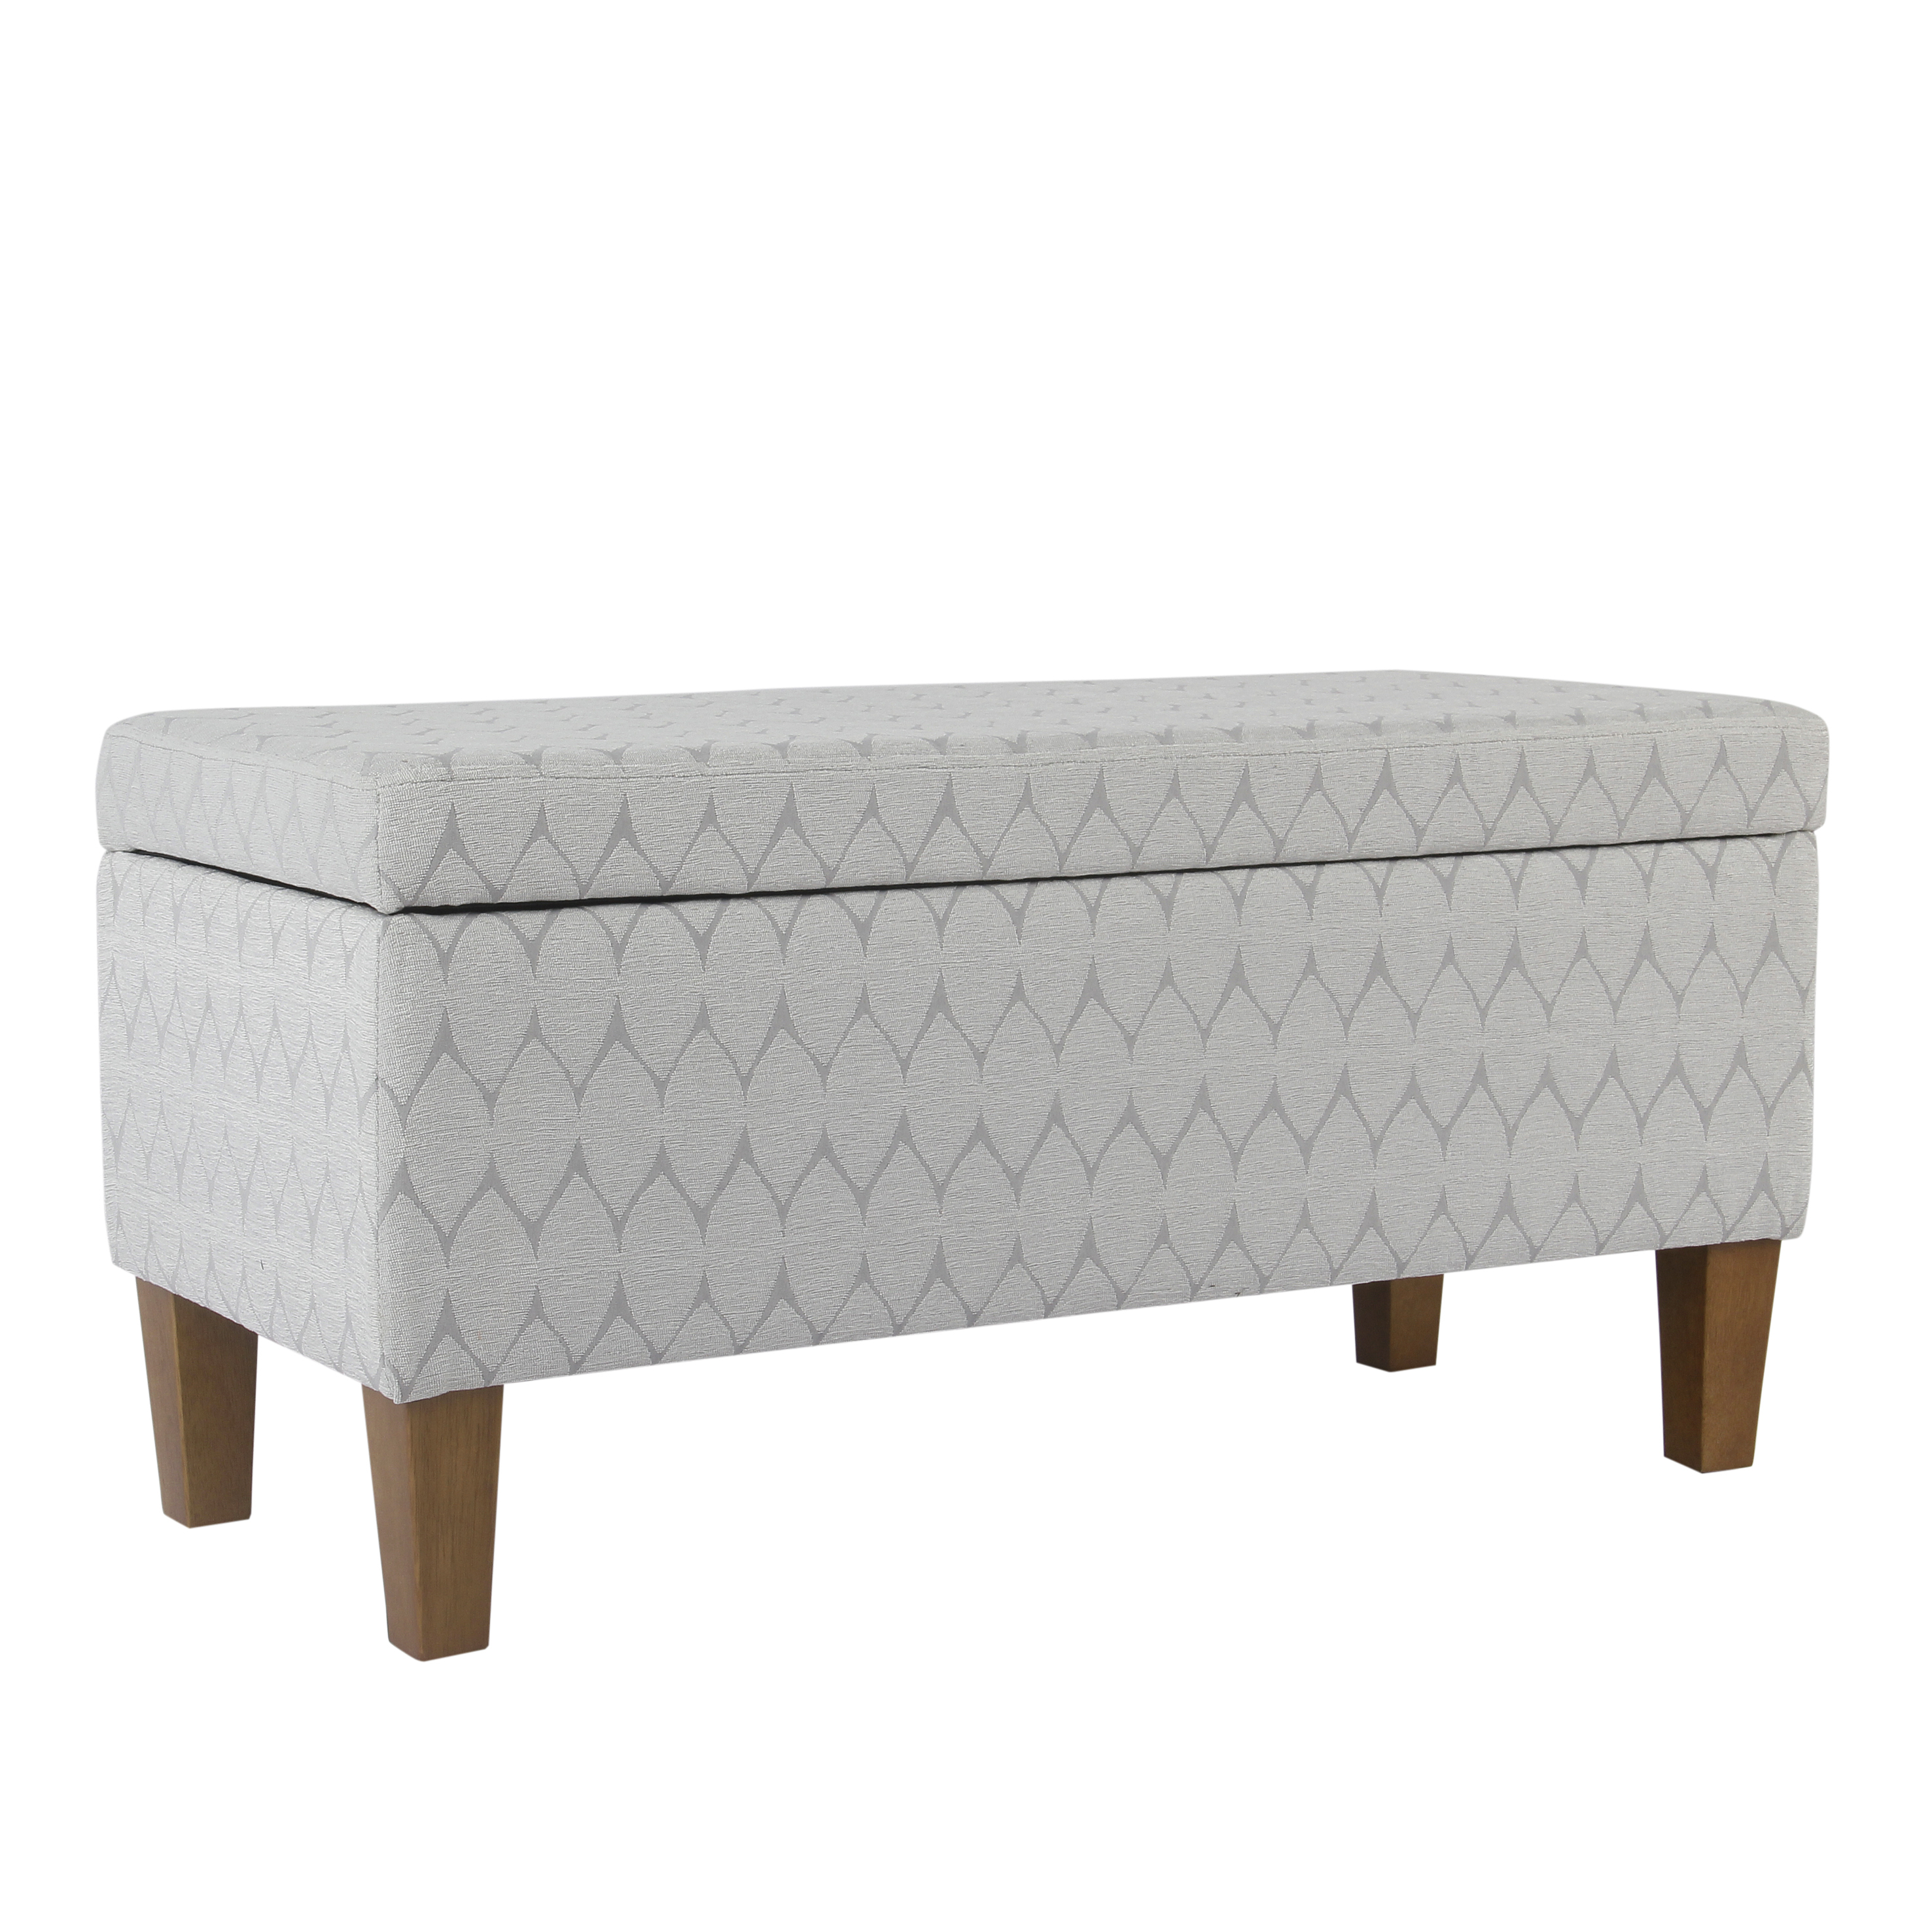 Geometric Patterned Fabric Upholstered Wooden Bench With Hinged Storage, Large, Gray And Brown- Saltoro Sherpi